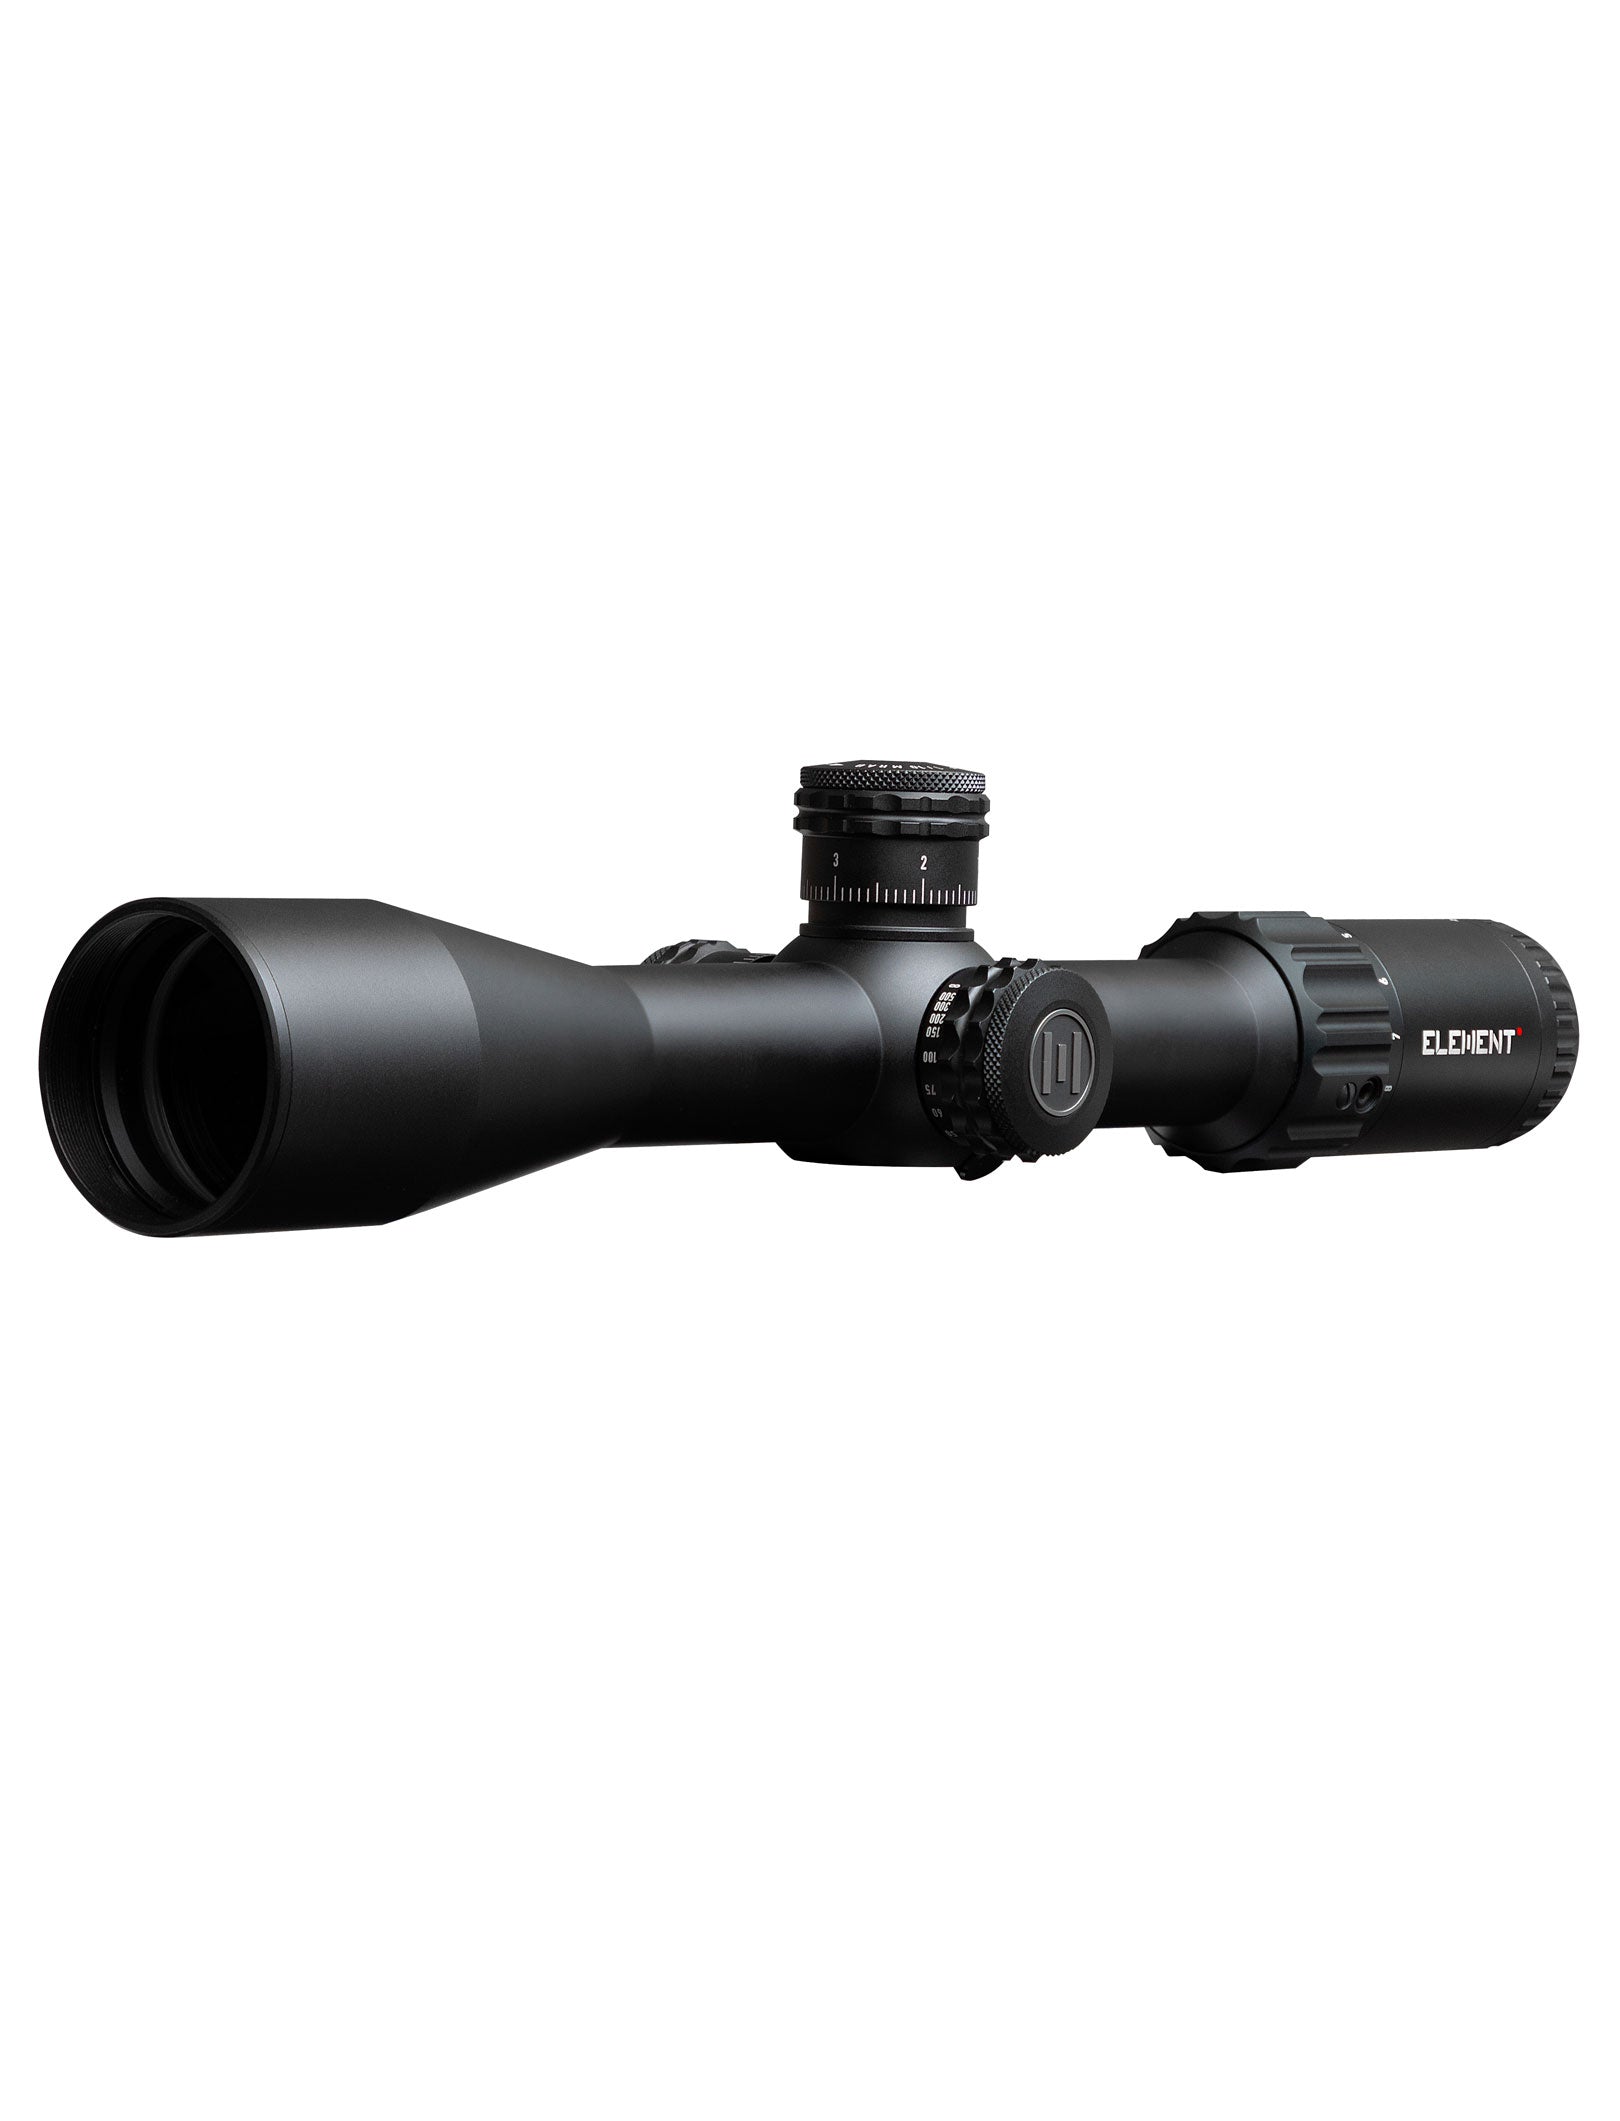 Element Helix 4-16x44 APR-1C FFP MRAD Optic Scope -  - Mansfield Hunting & Fishing - Products to prepare for Corona Virus